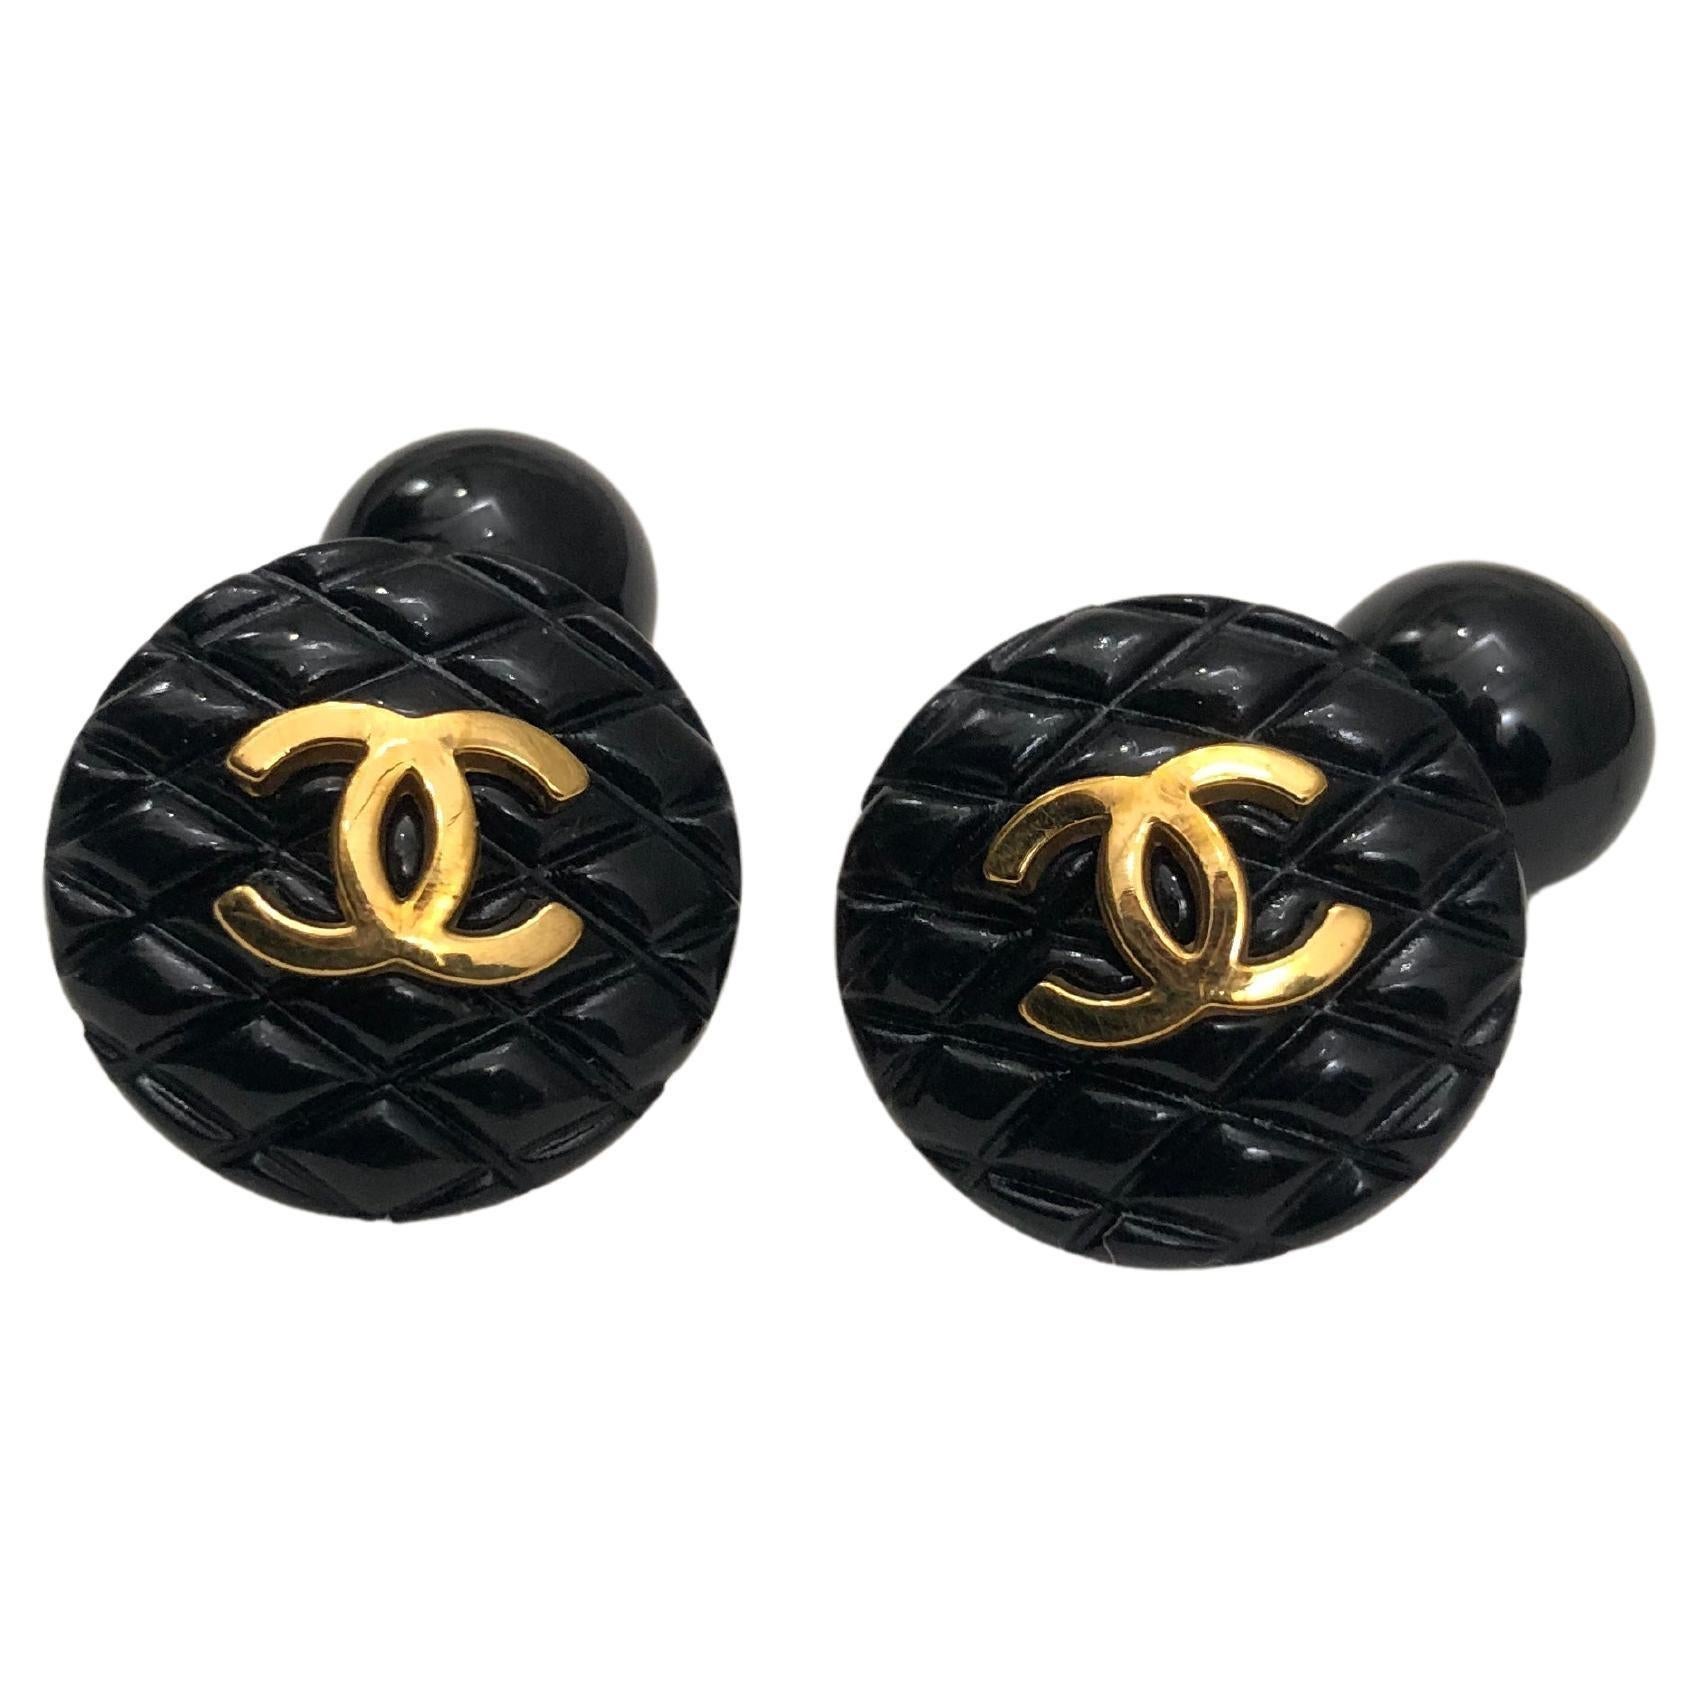 These vintage CHANEL Cufflinks are crafted of crafted of black resin in diamond quilted pattern featuring a gold toned CC logo. These Chanel cufflinks are perfect for both sexes. The diameter measures approximately 1.8 cm. Stamped CHANEL 95P made in